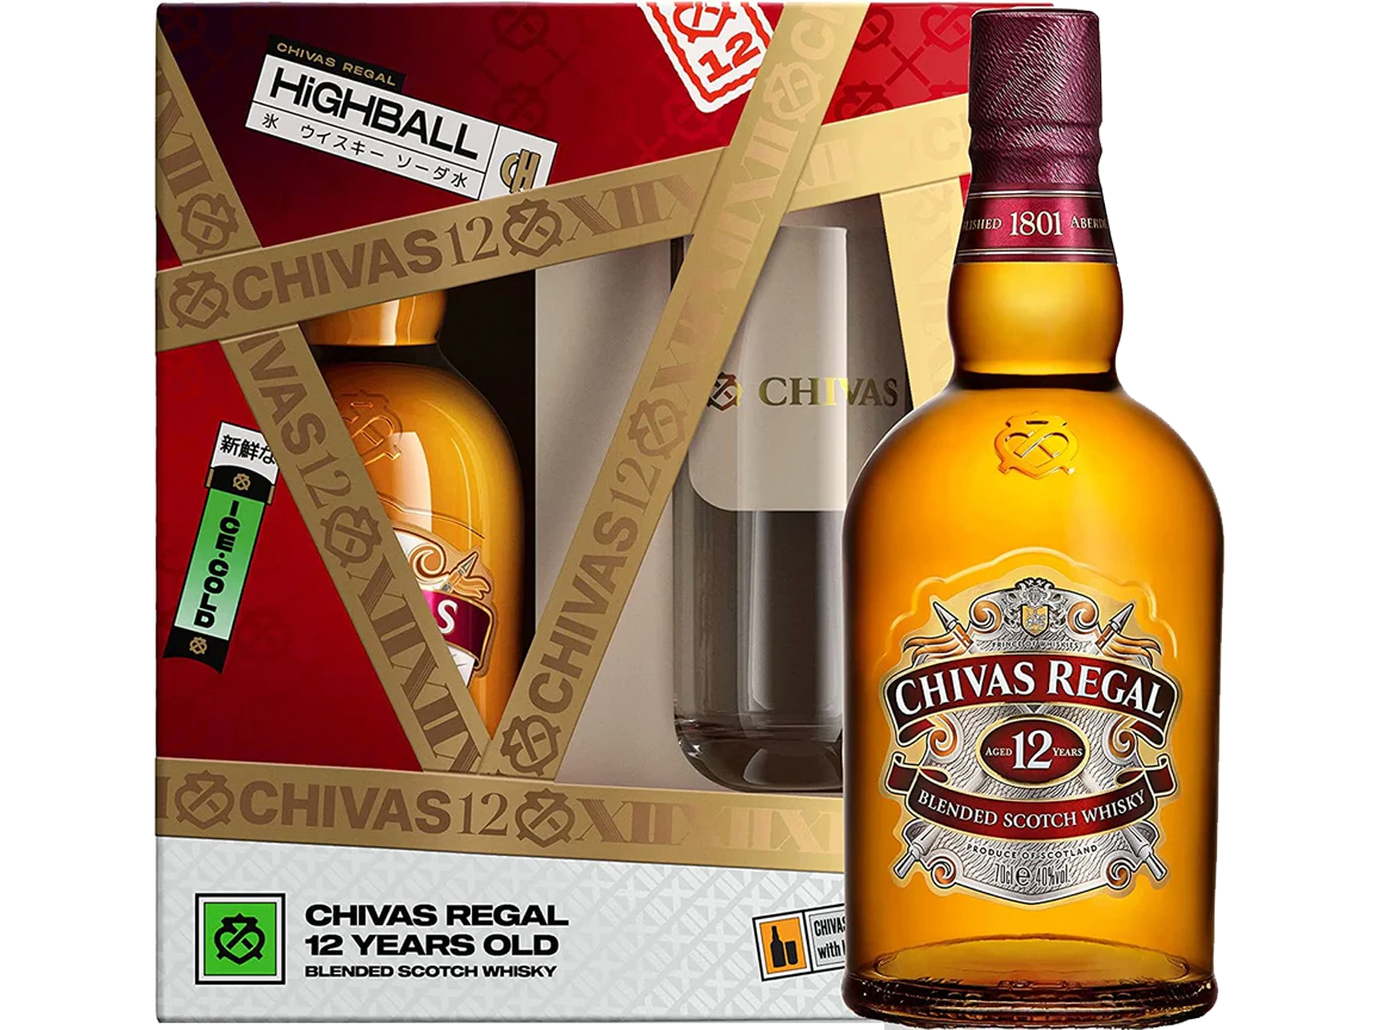 Chivas Regal 12 Year Old Blended Scotch Whisky Highball Glass Gift Set 700ml